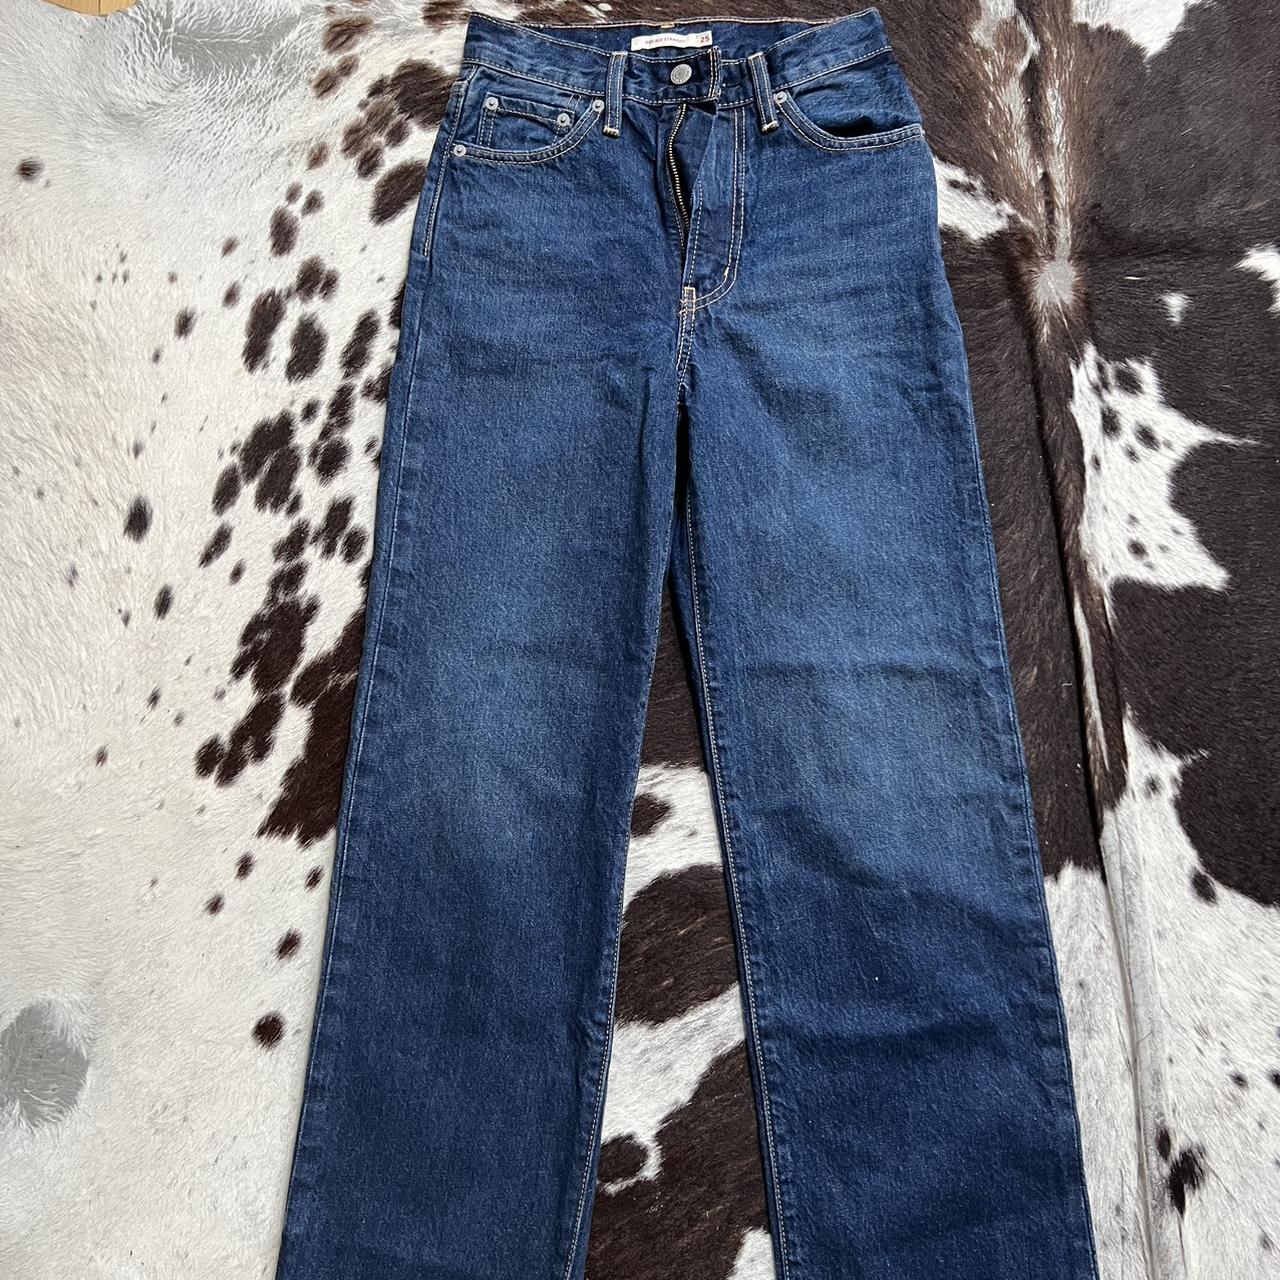 Rib cage straight Levi jeans! Never worn gifted to... - Depop